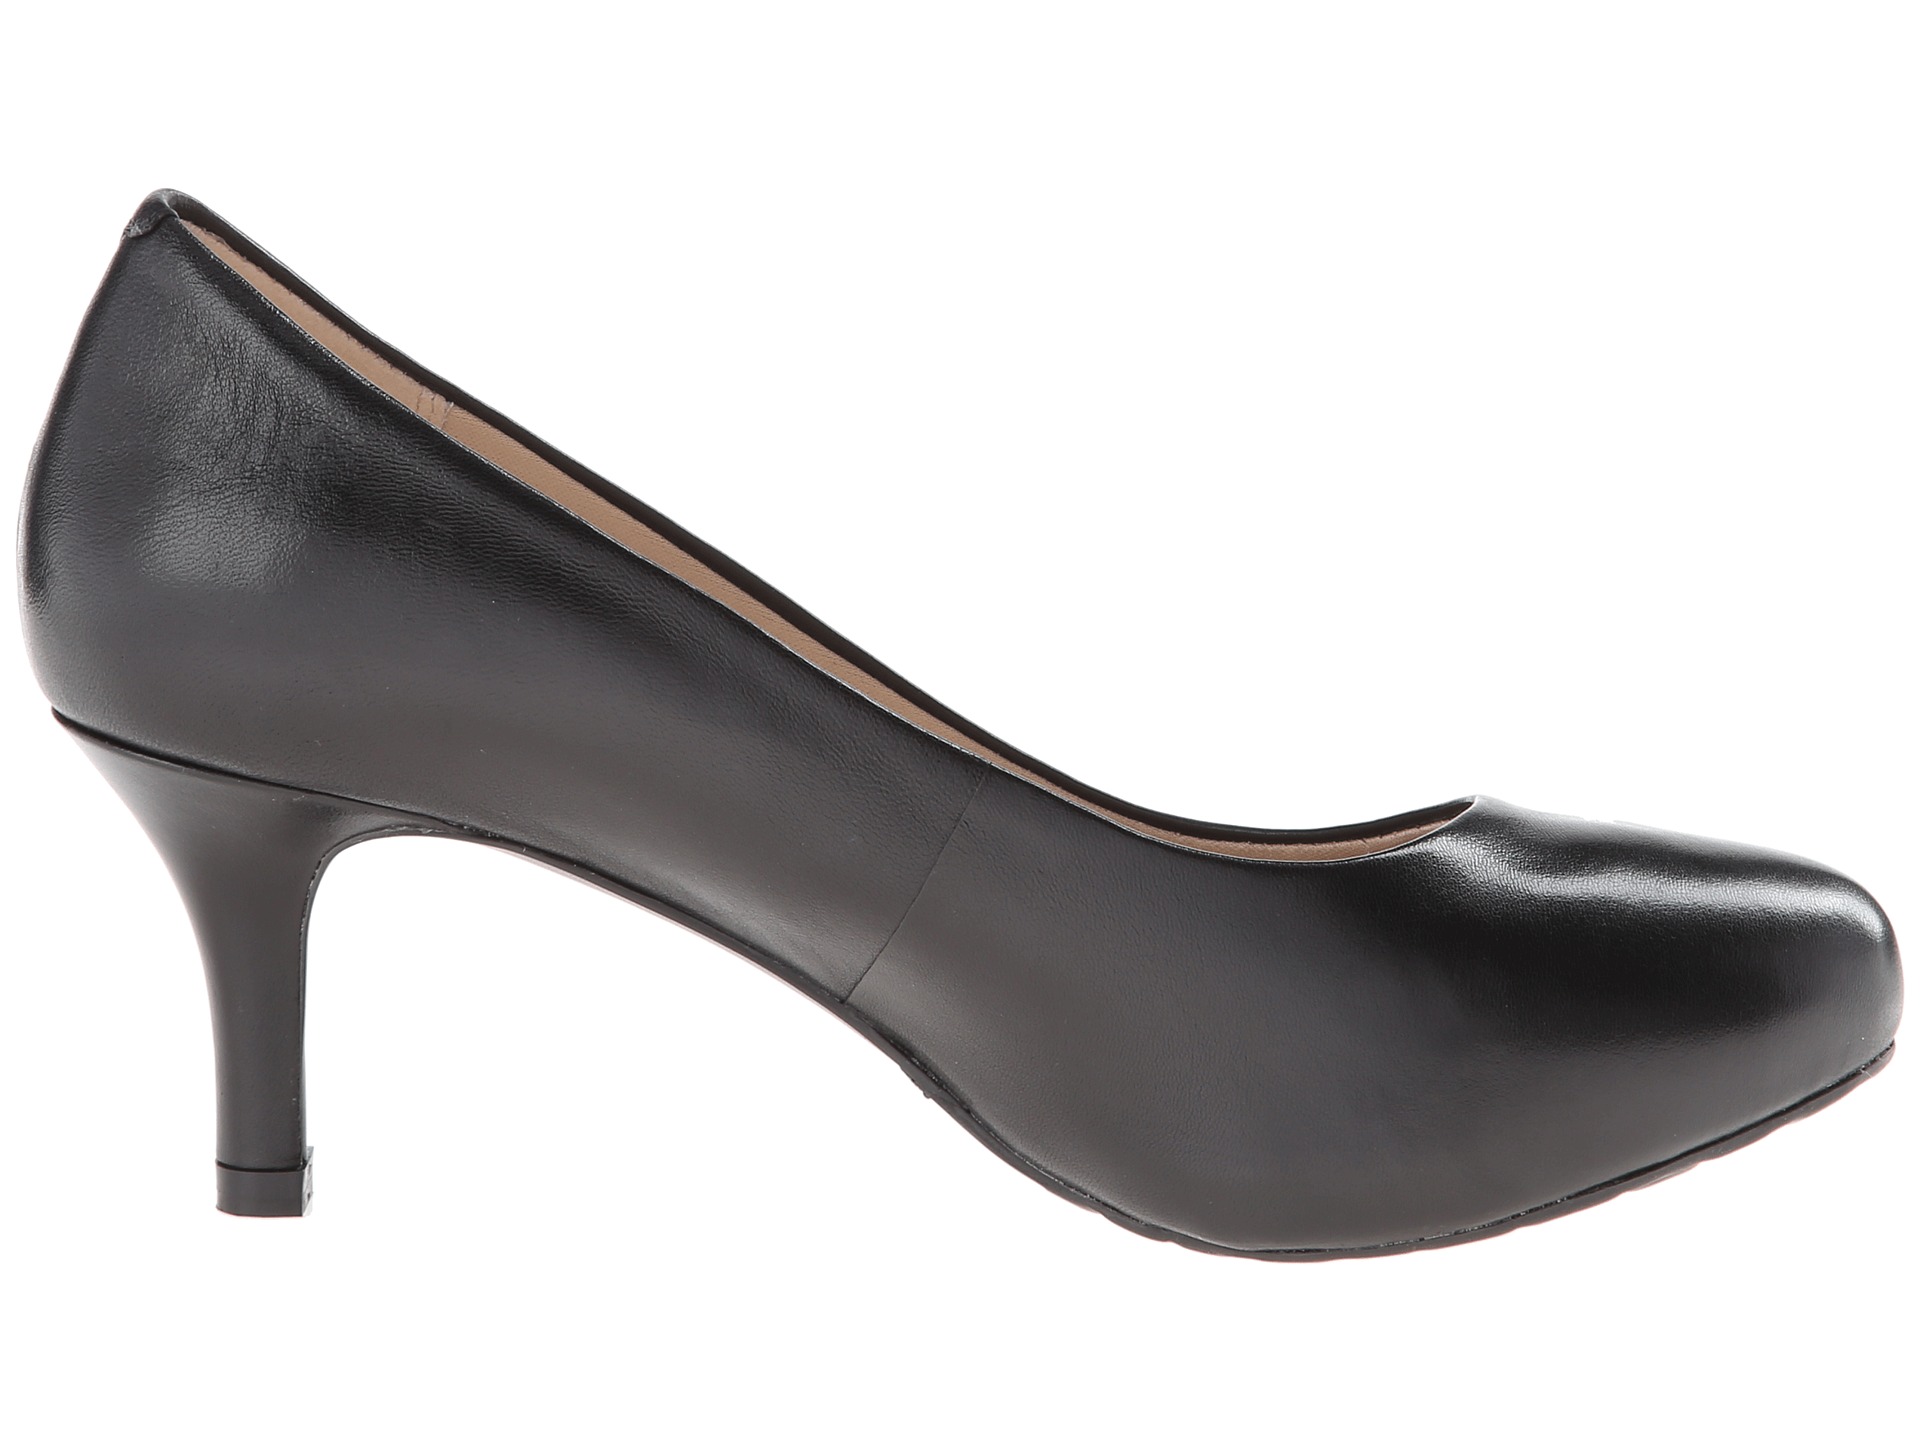 Rockport Seven to 7 Low Pump at Zappos.com